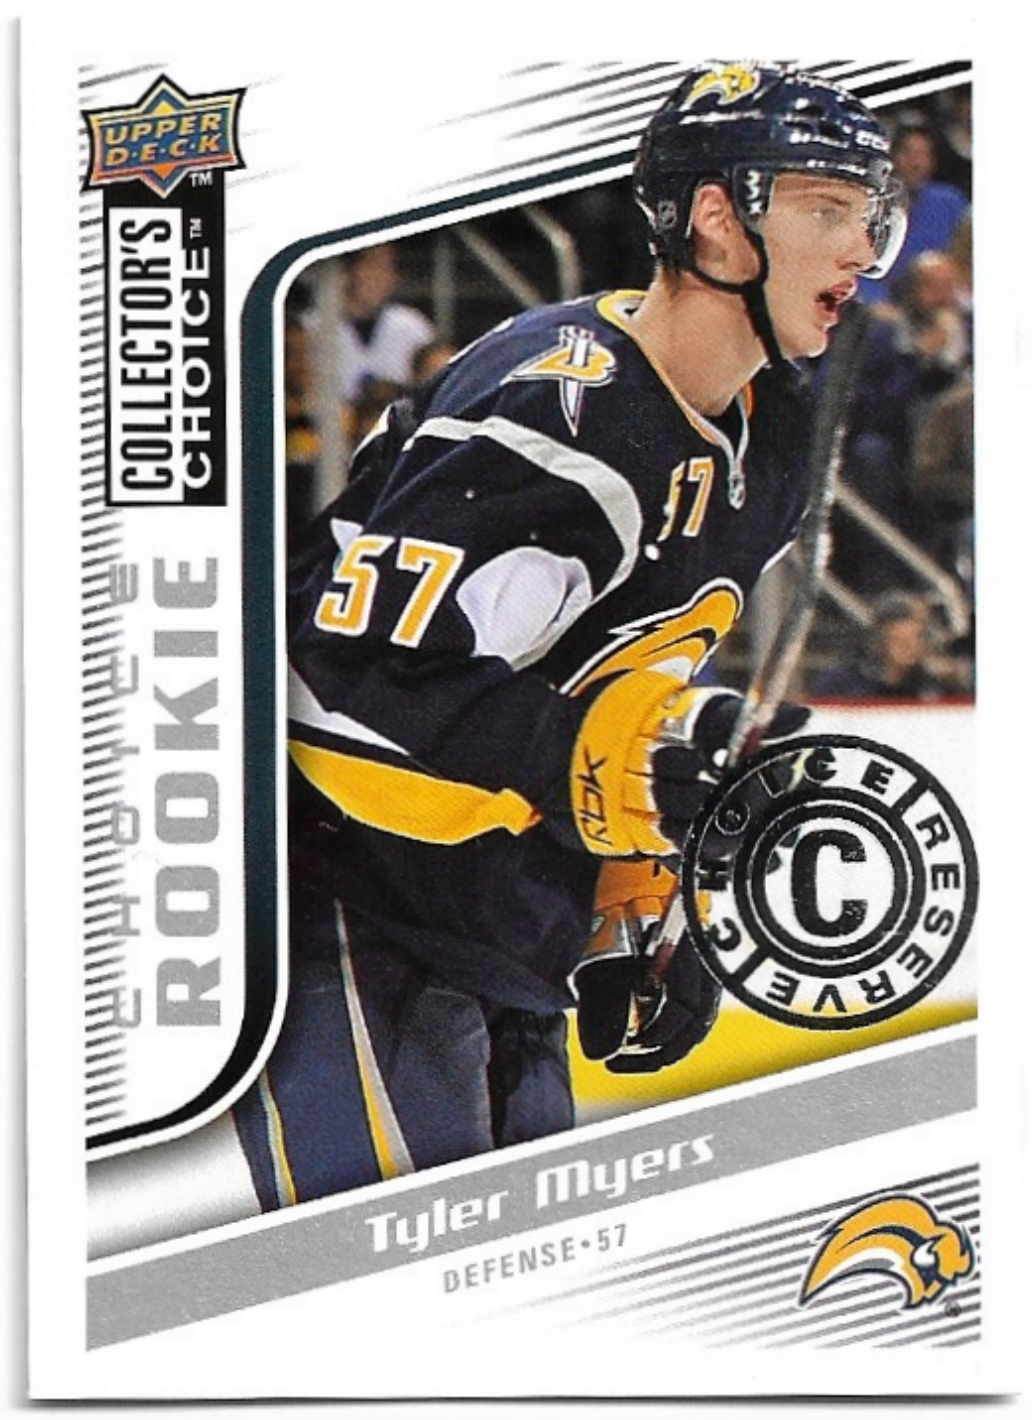 Choice Rookie Reserve TYLER MYERS 09-10 UD Collector's Choice